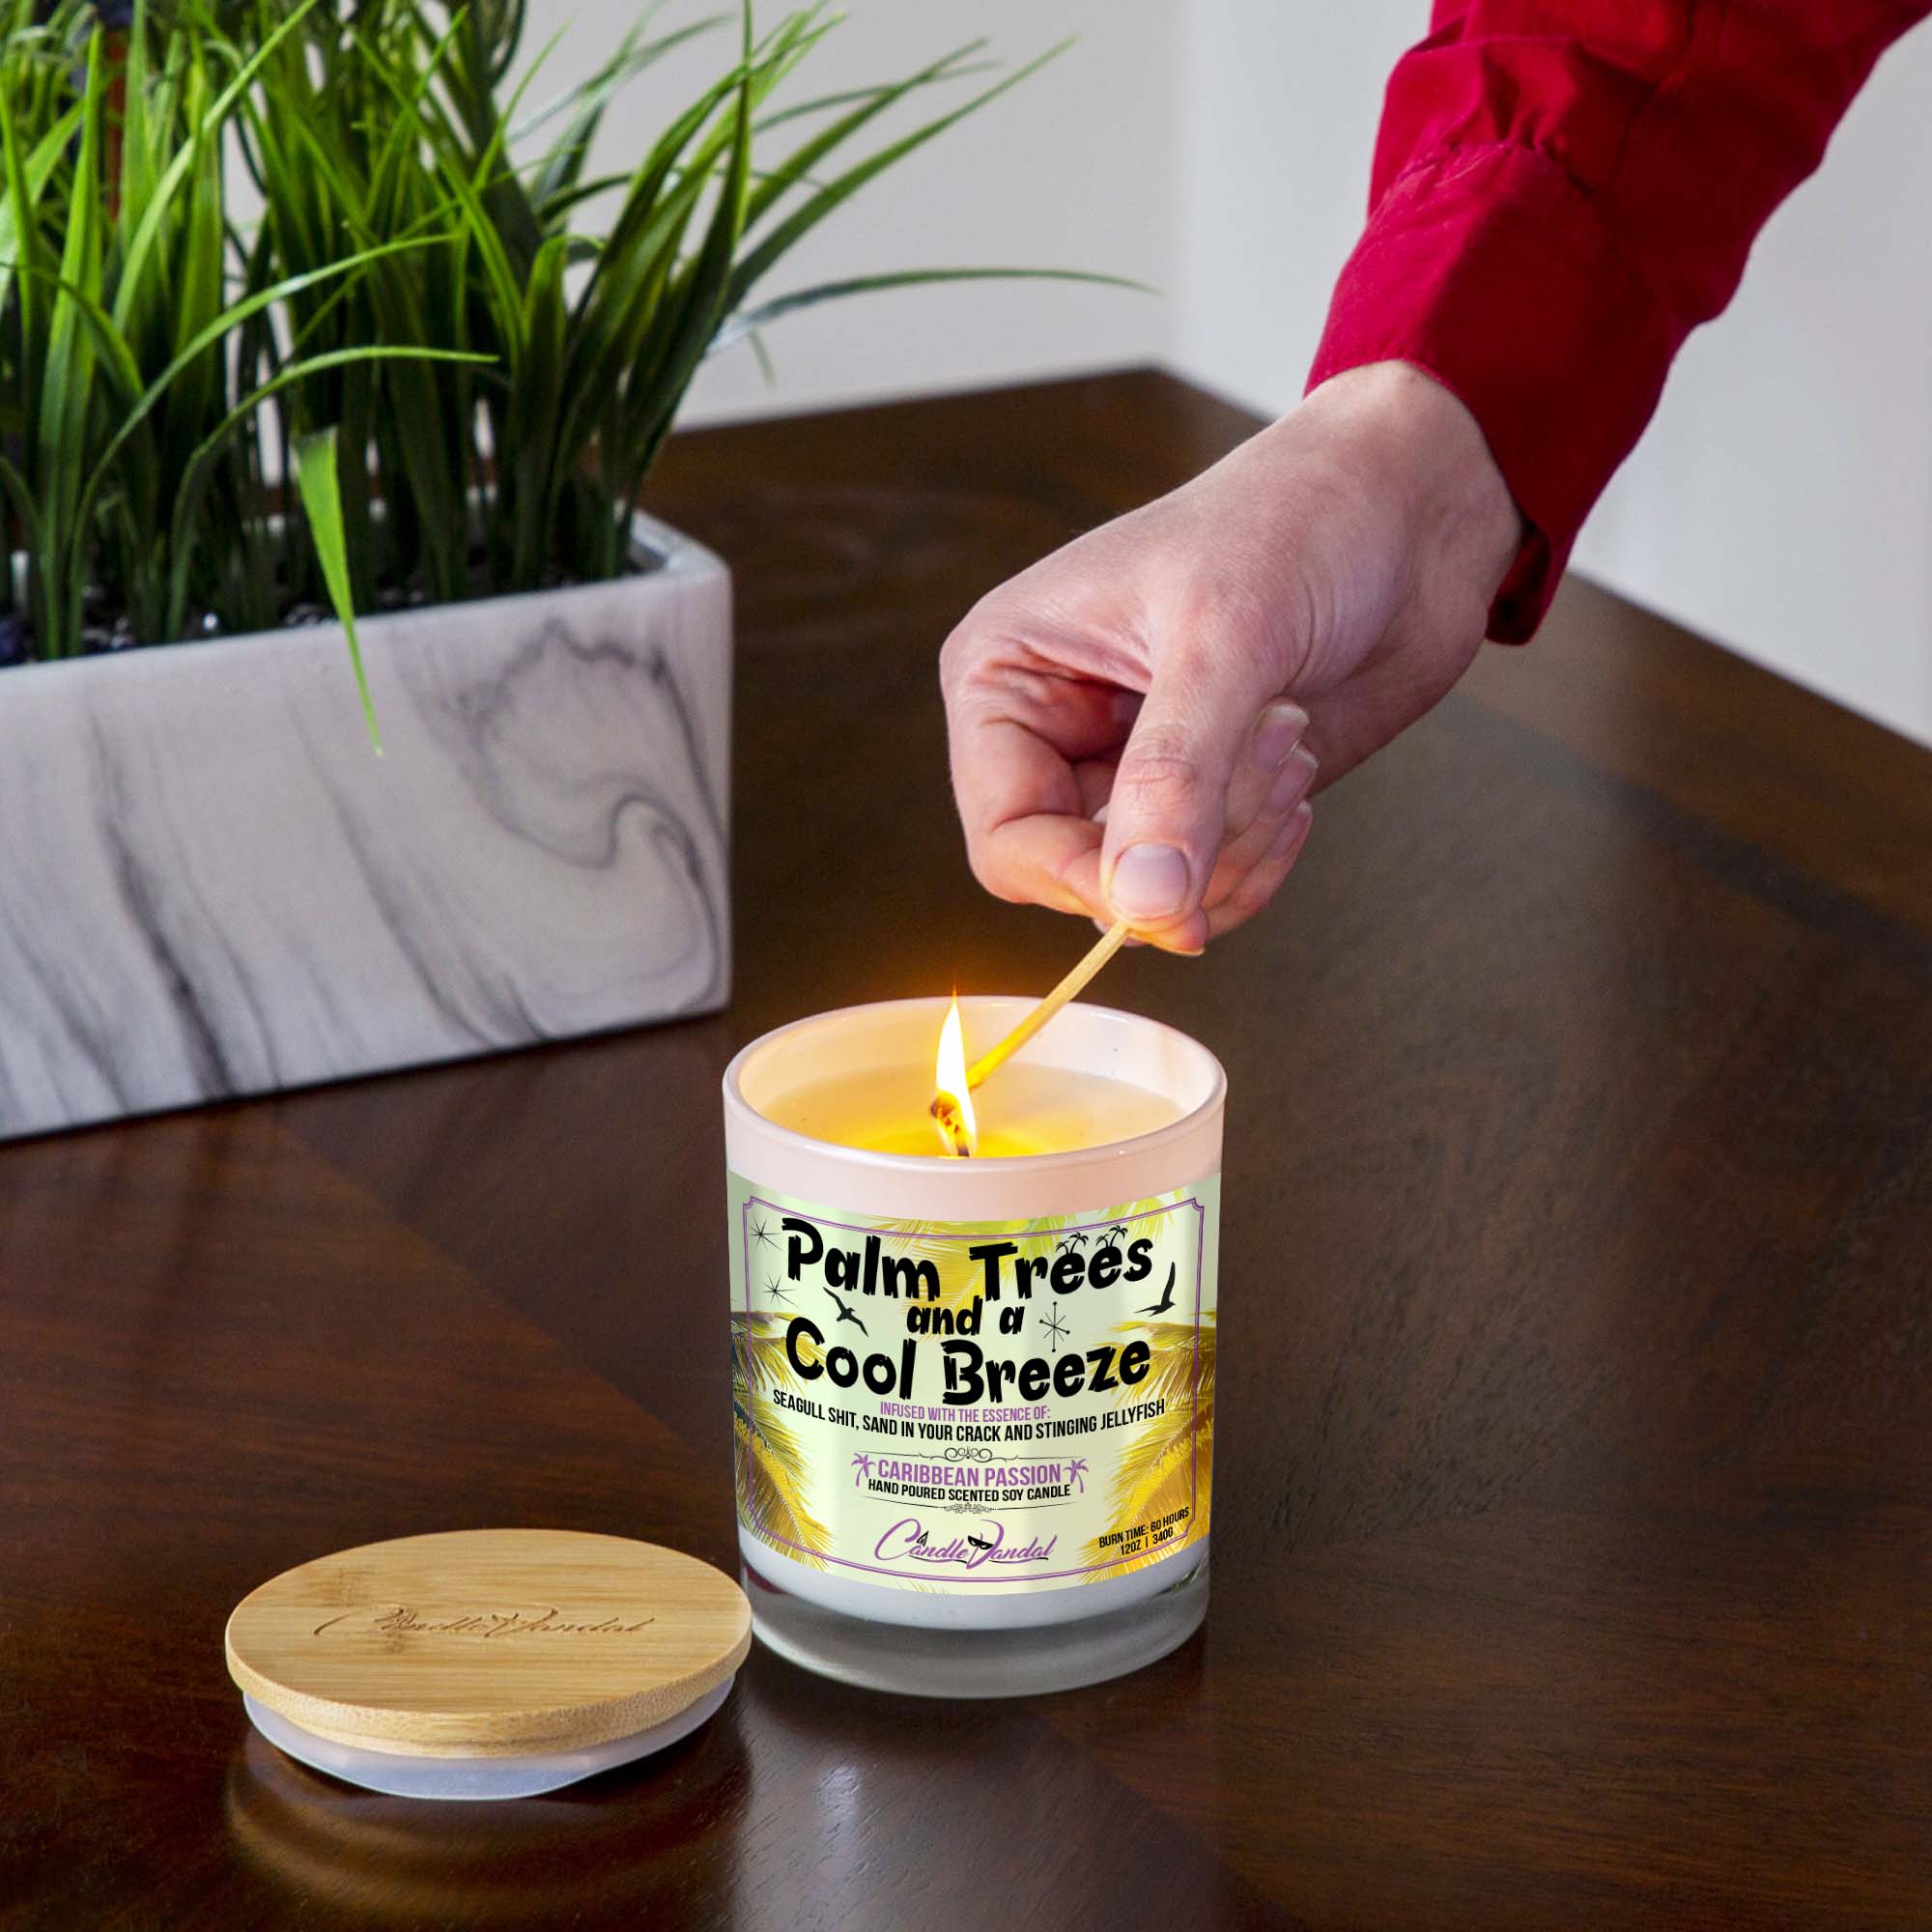 https://candlevandal.com/wp-content/uploads/2020/01/palm-trees-and-a-cool-breeze-lighting-candle.jpg